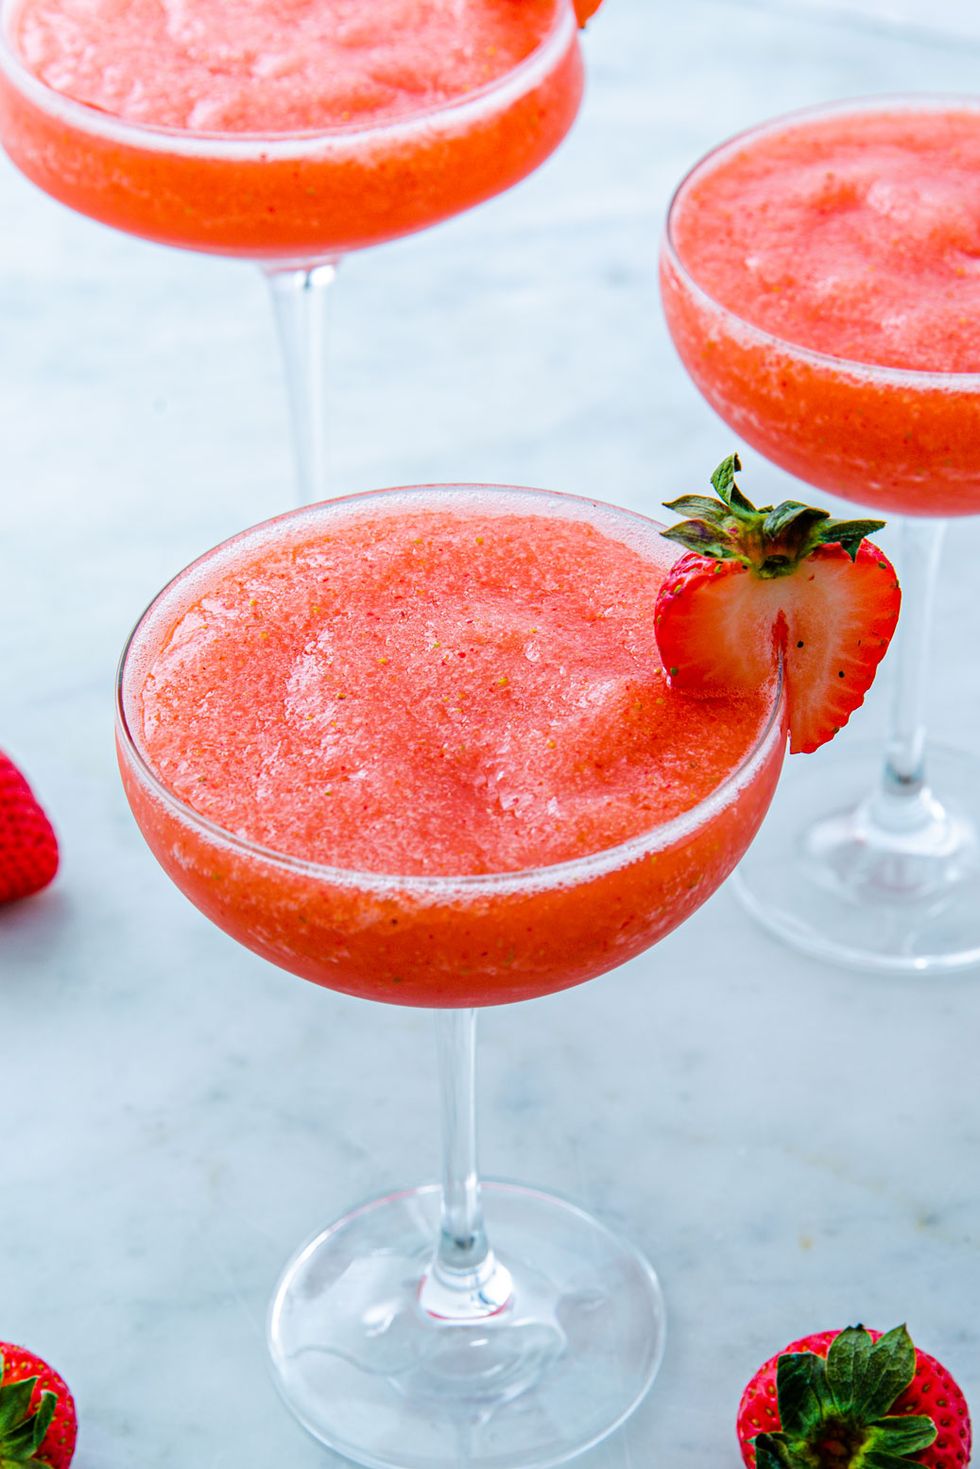 29 Big-Batch Summer Cocktails To Help Cool You Off